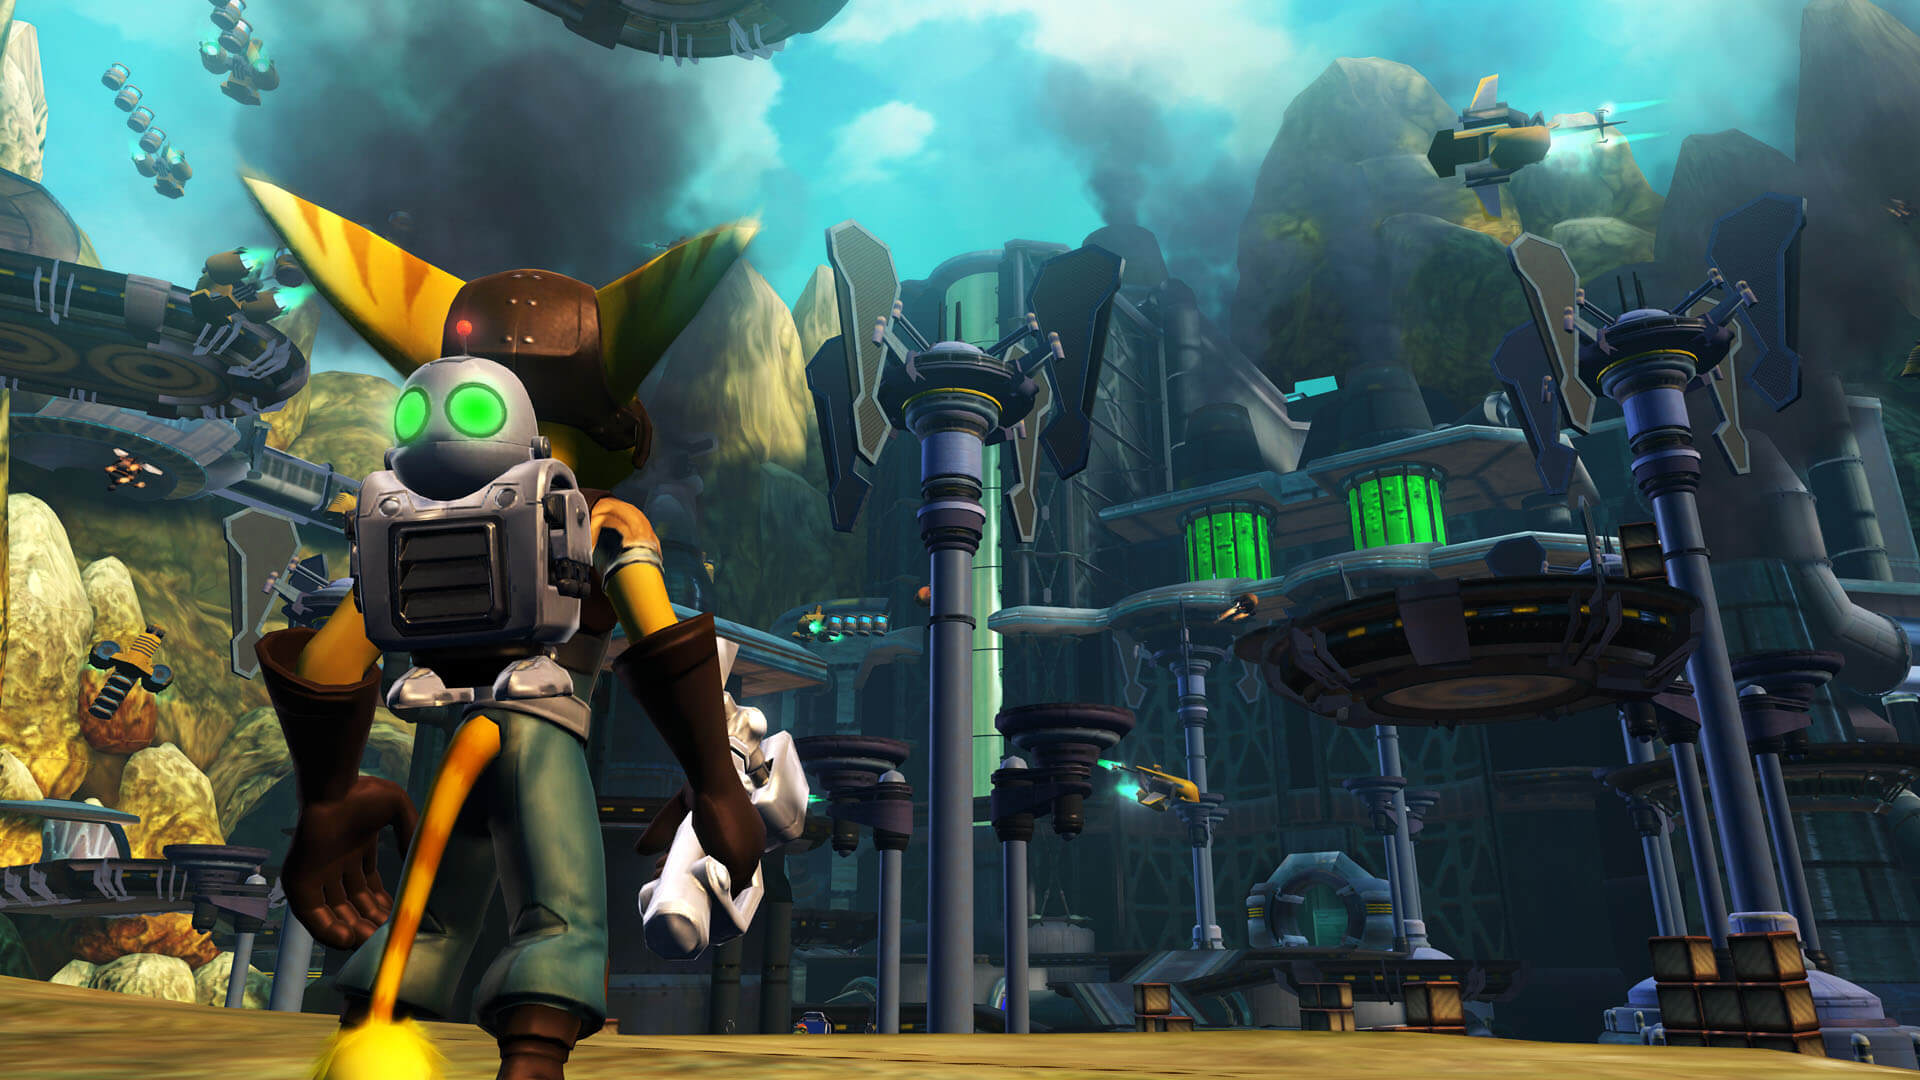 Tools of destruction. Ratchet and Clank ps3. Ratchet & Clank 3. Ratchet and Clank на пс3. Игра Ratchet Clank ps3.